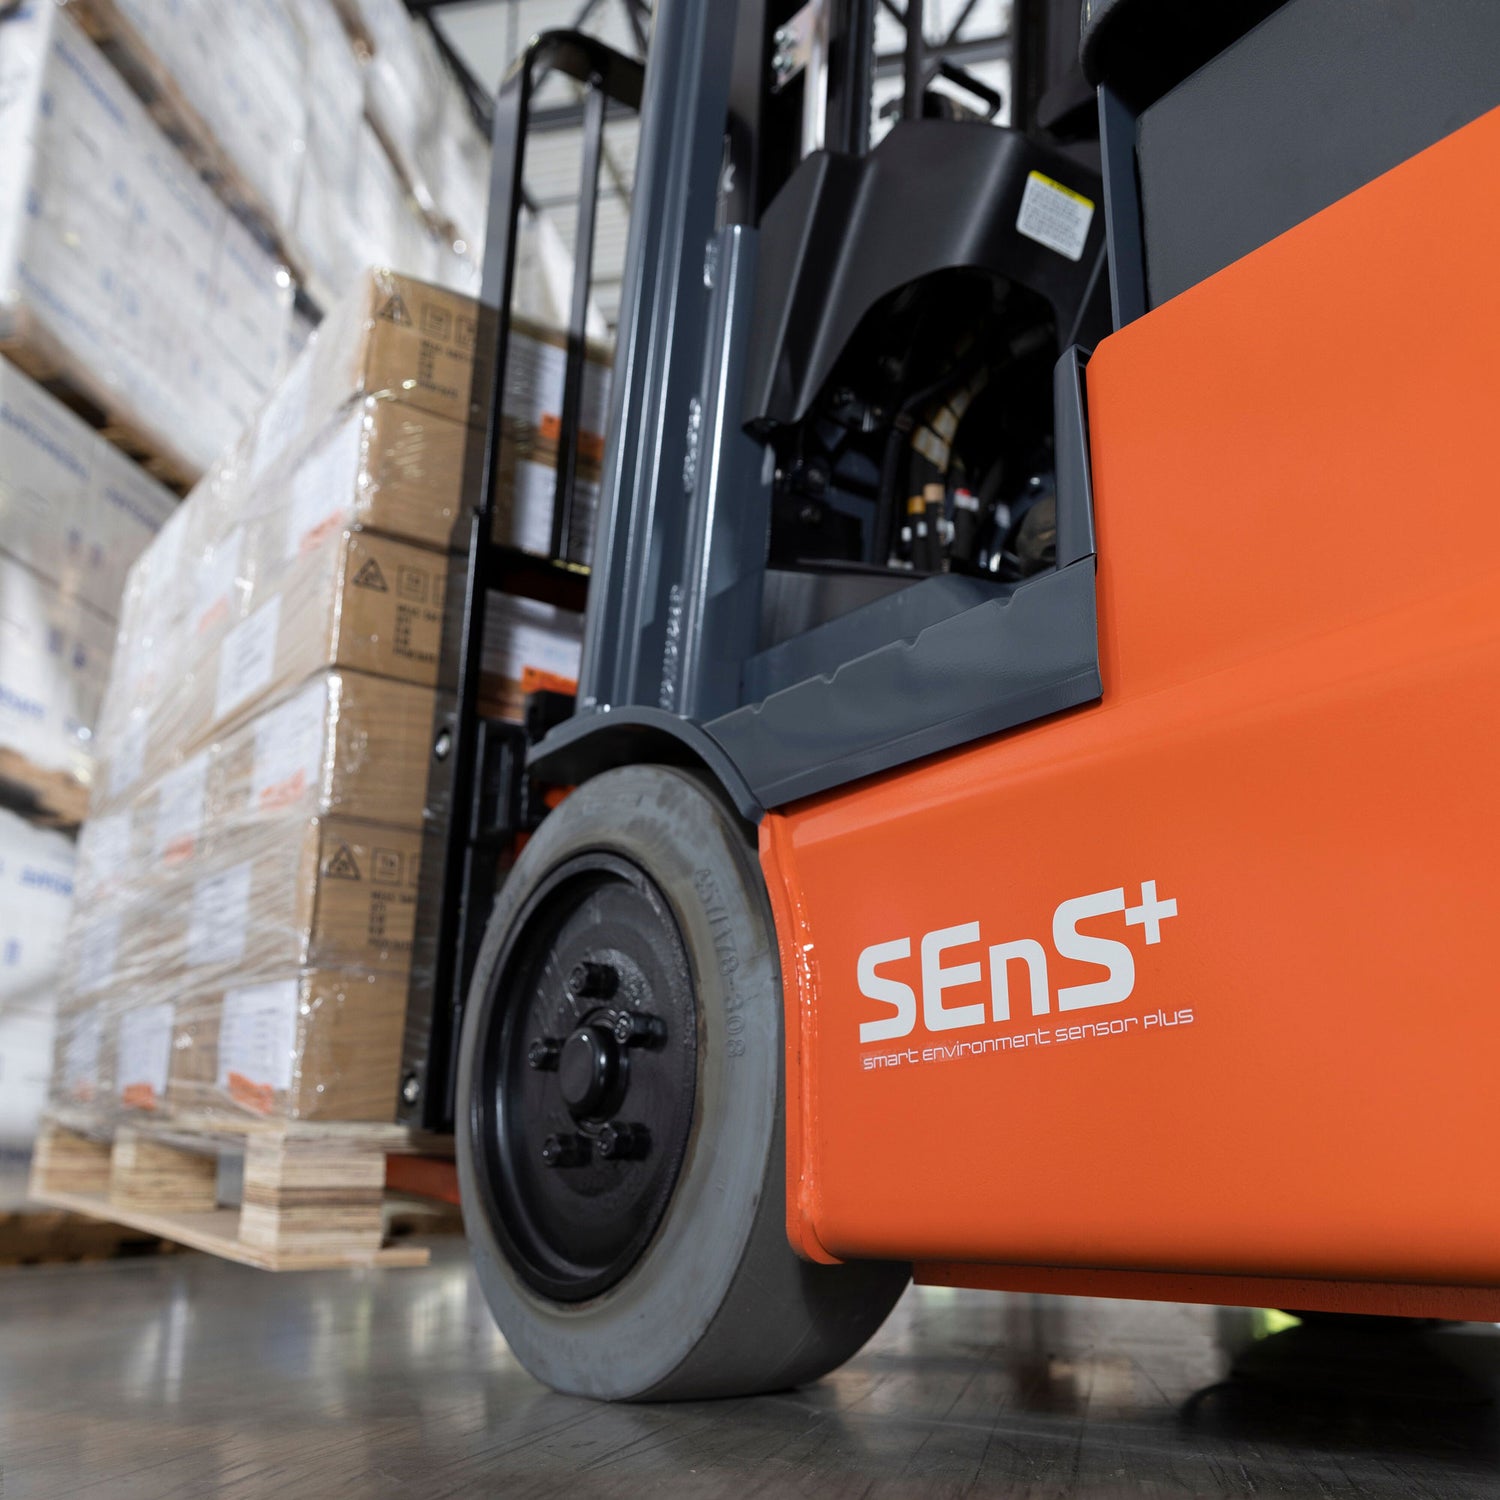 What is SEnS+ 